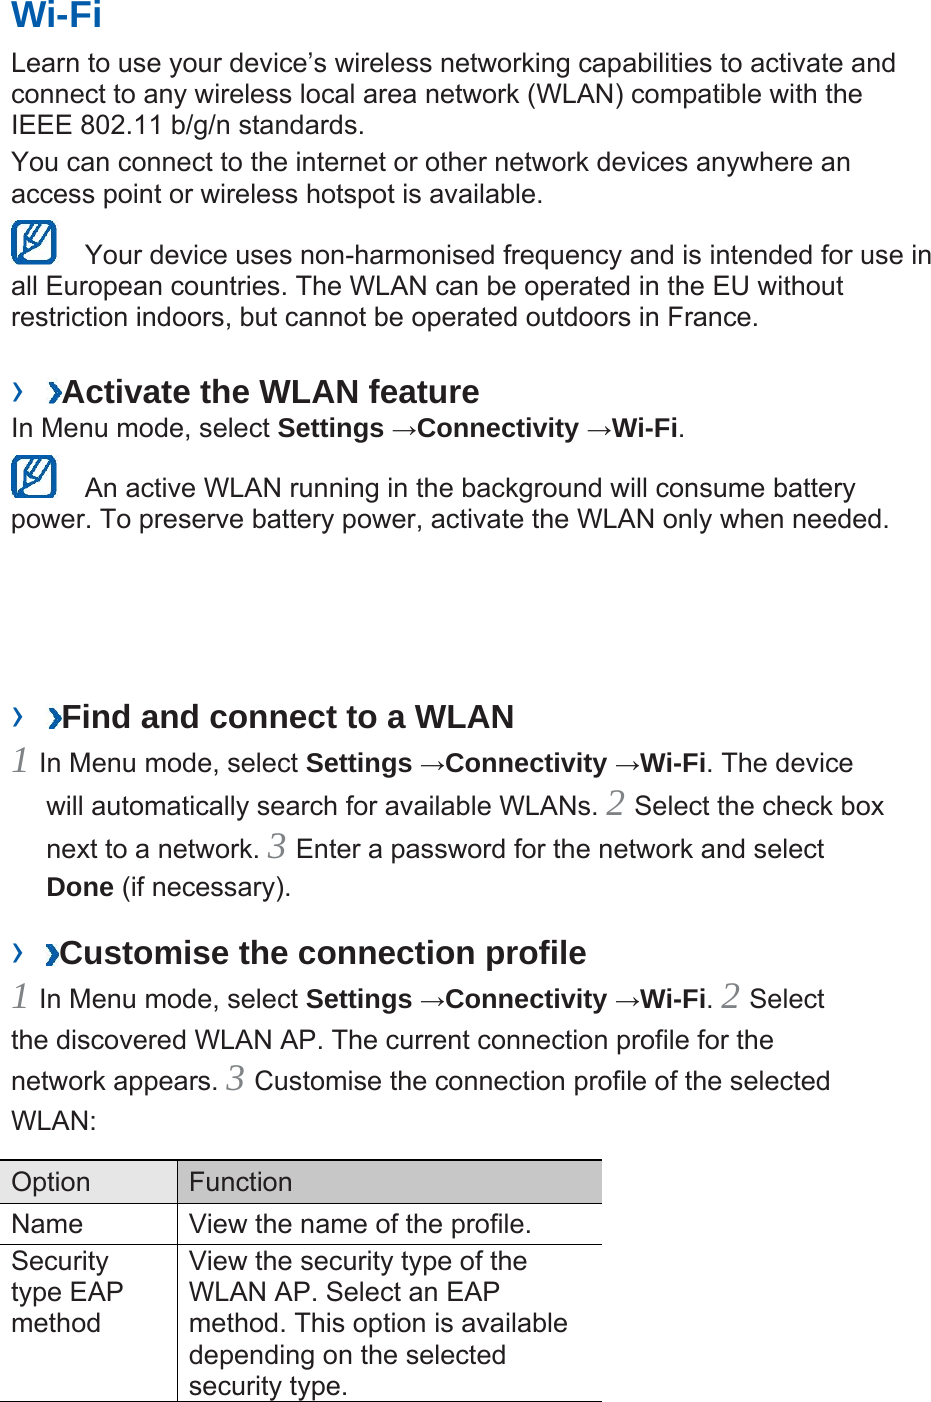 Wi-Fi   Learn to use your device’s wireless networking capabilities to activate and connect to any wireless local area network (WLAN) compatible with the IEEE 802.11 b/g/n standards.   You can connect to the internet or other network devices anywhere an access point or wireless hotspot is available.     Your device uses non-harmonised frequency and is intended for use in all European countries. The WLAN can be operated in the EU without restriction indoors, but cannot be operated outdoors in France.   ›  Activate the WLAN feature   In Menu mode, select Settings →Connectivity →Wi-Fi.    An active WLAN running in the background will consume battery power. To preserve battery power, activate the WLAN only when needed.   ›  Find and connect to a WLAN   1 In Menu mode, select Settings →Connectivity →Wi-Fi. The device will automatically search for available WLANs. 2 Select the check box next to a network. 3 Enter a password for the network and select Done (if necessary).   ›  Customise the connection profile   1 In Menu mode, select Settings →Connectivity →Wi-Fi. 2 Select the discovered WLAN AP. The current connection profile for the network appears. 3 Customise the connection profile of the selected WLAN:  Option   Function  Name    View the name of the profile.   Security type EAP method  View the security type of the WLAN AP. Select an EAP method. This option is available depending on the selected security type.   